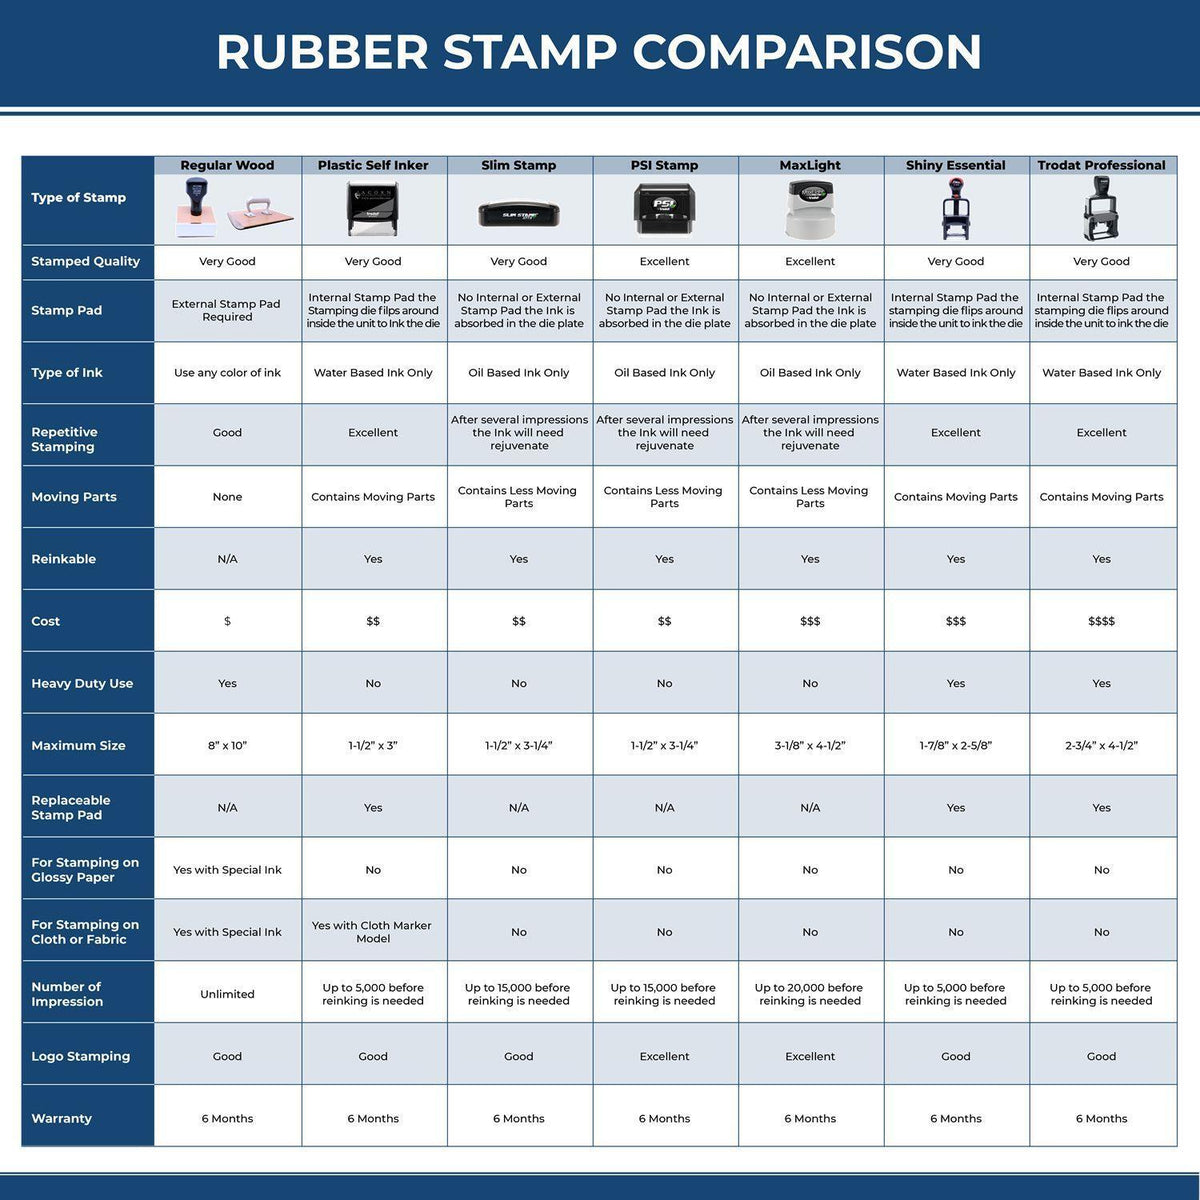 Large Pre Inked Please Finish At Home And Return Stamp 4686SLIM Rubber Stamp Comparison